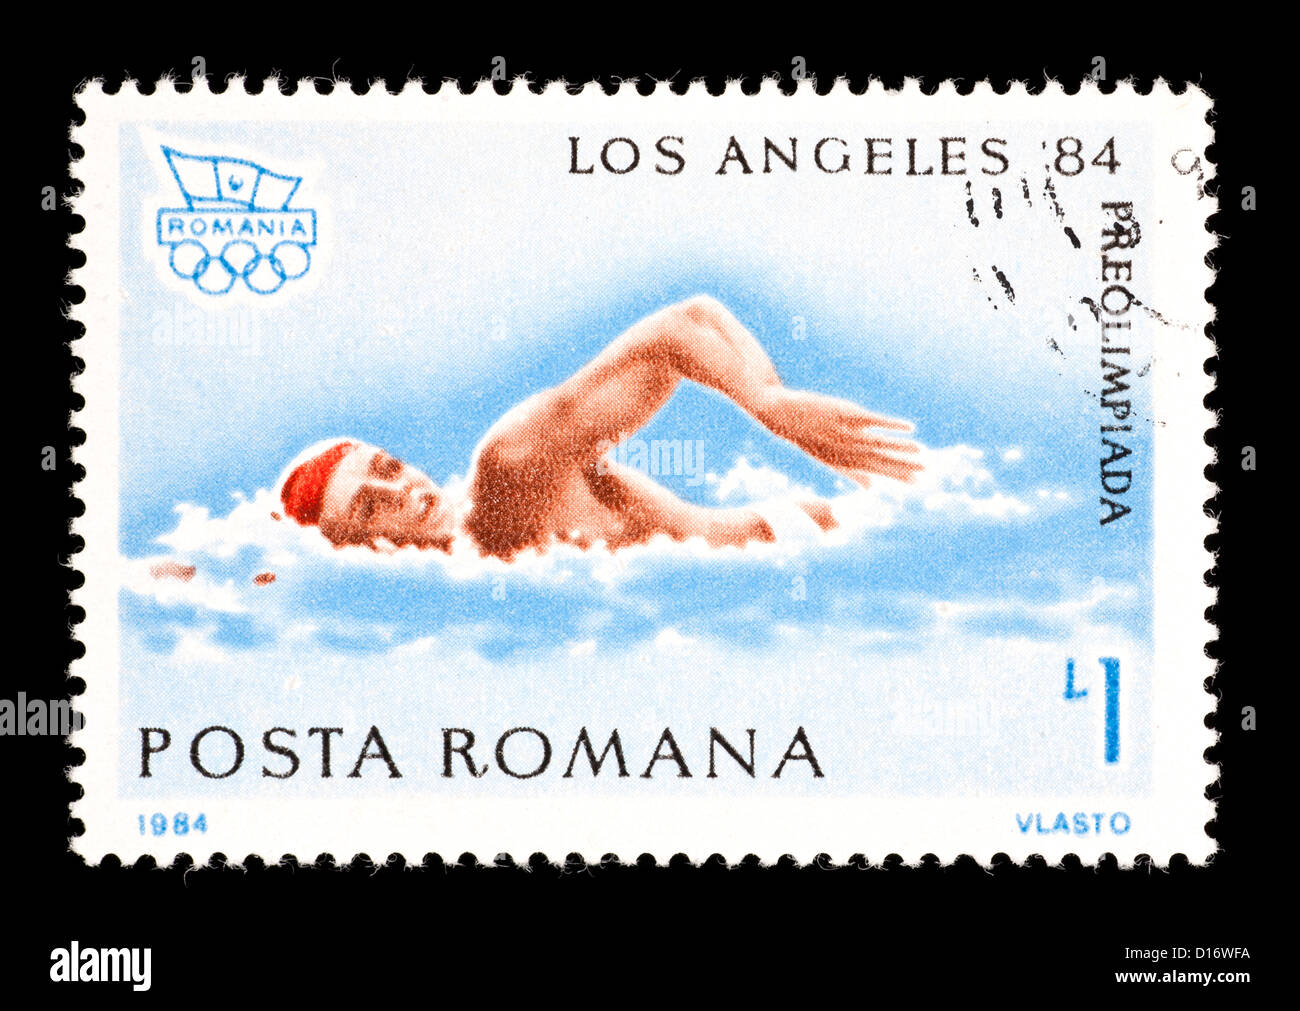 Postage stamp from Romania depicting a swimmer, issued for the 1984 SUmmer Olympic Games in Los Angeles. Stock Photo